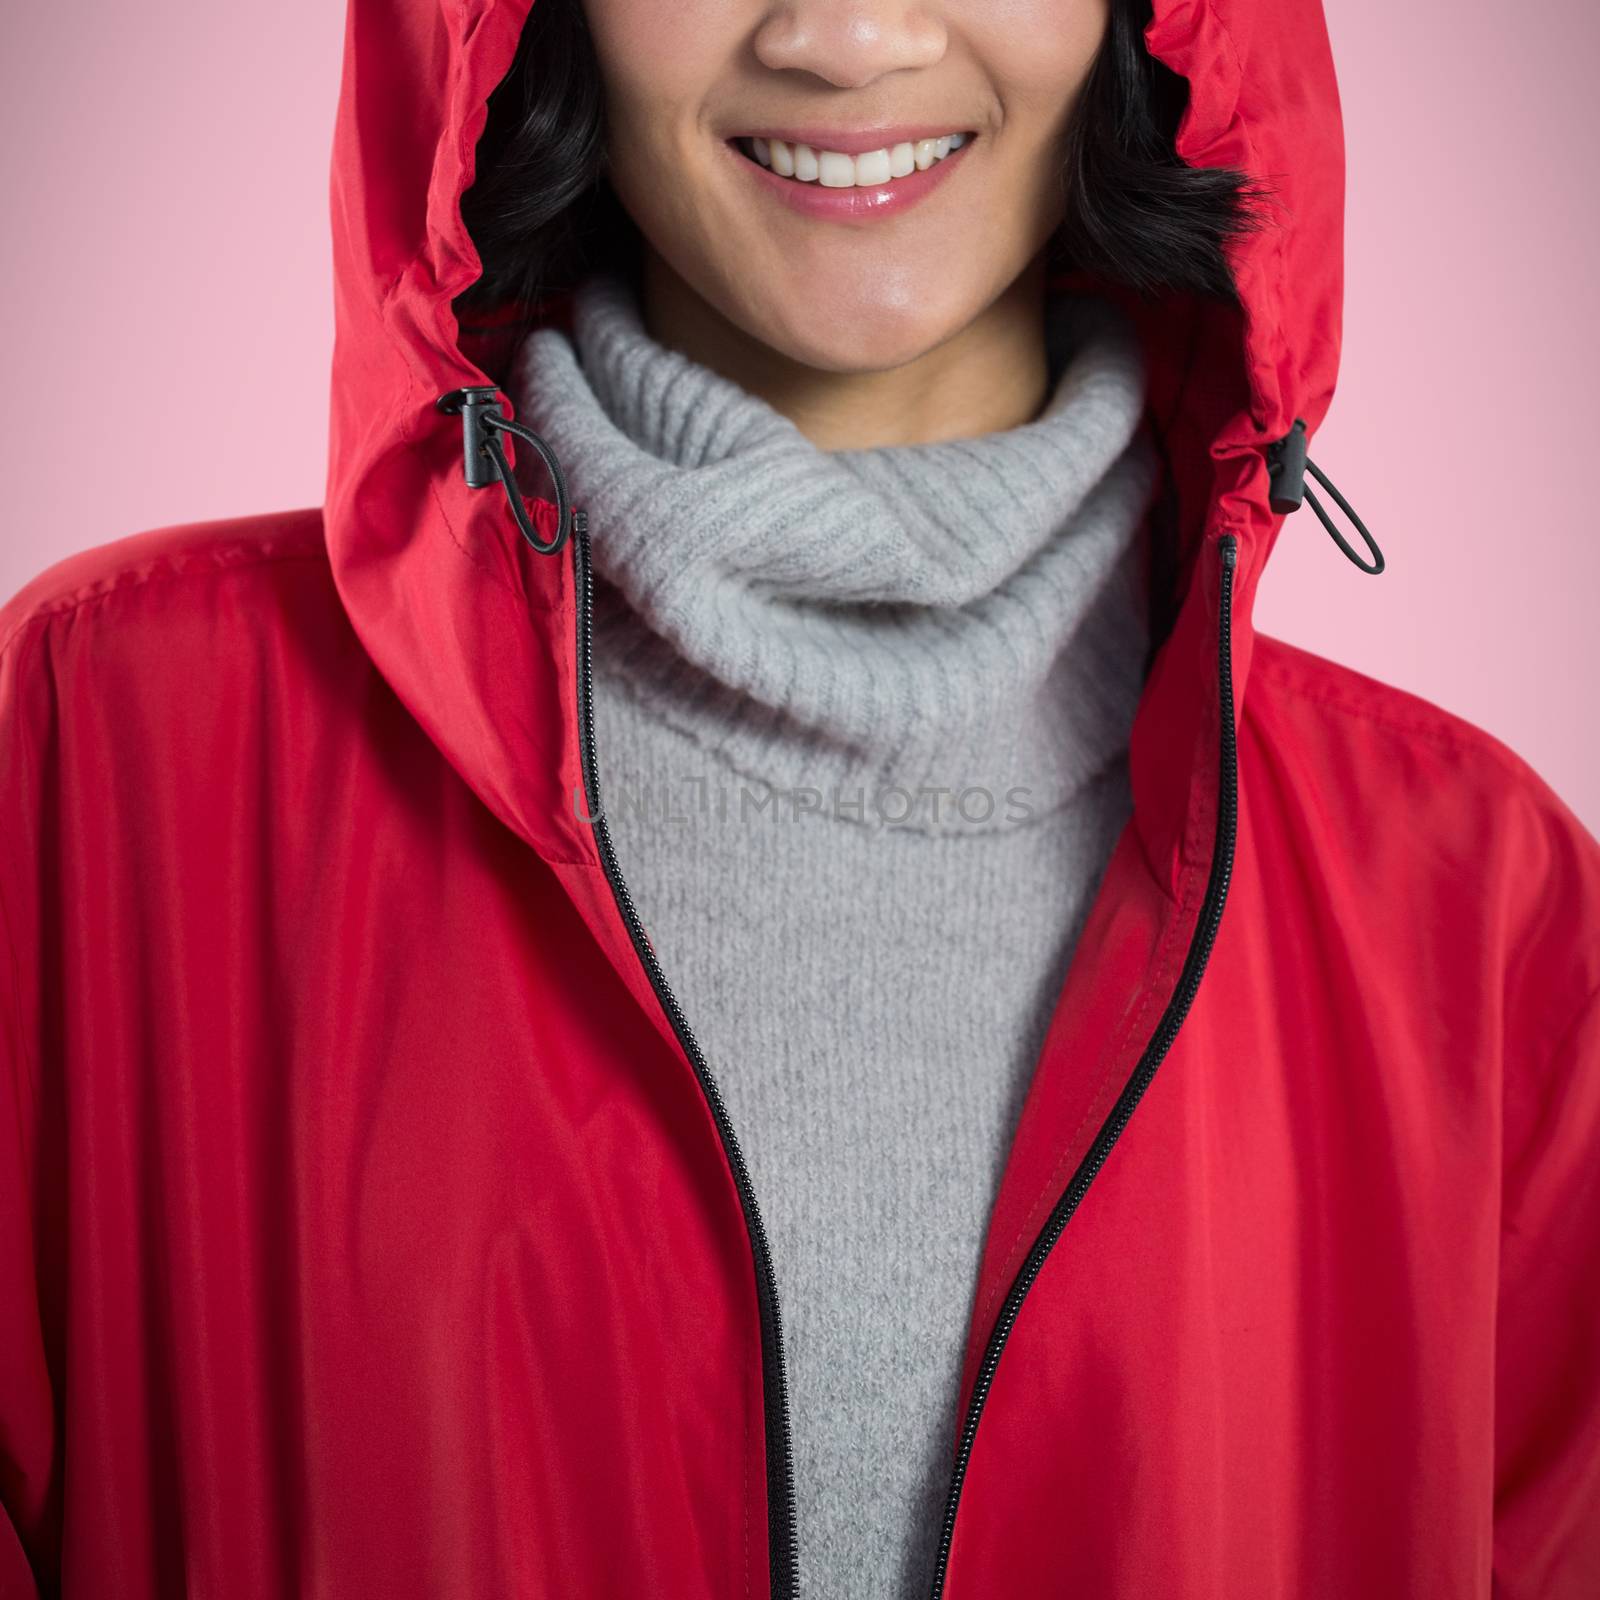 Smiling woman in hooded jacket standing against white background against pink background